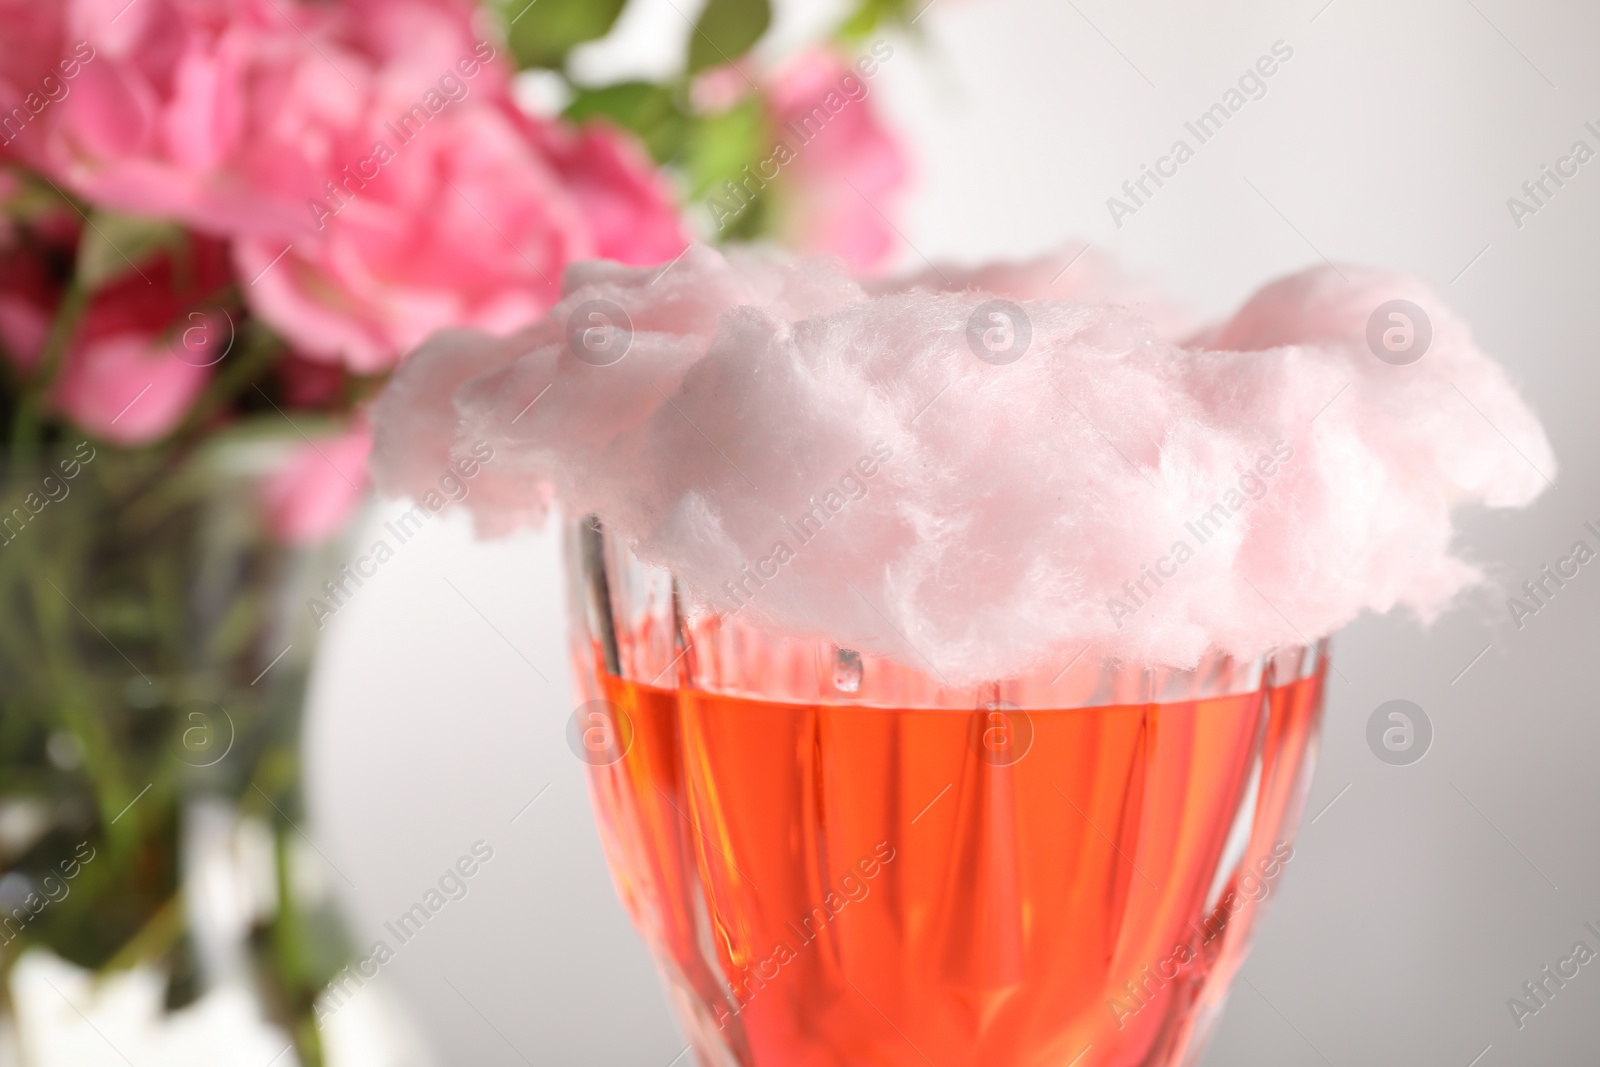 Photo of Cotton candy cocktail in glass against blurred background, closeup